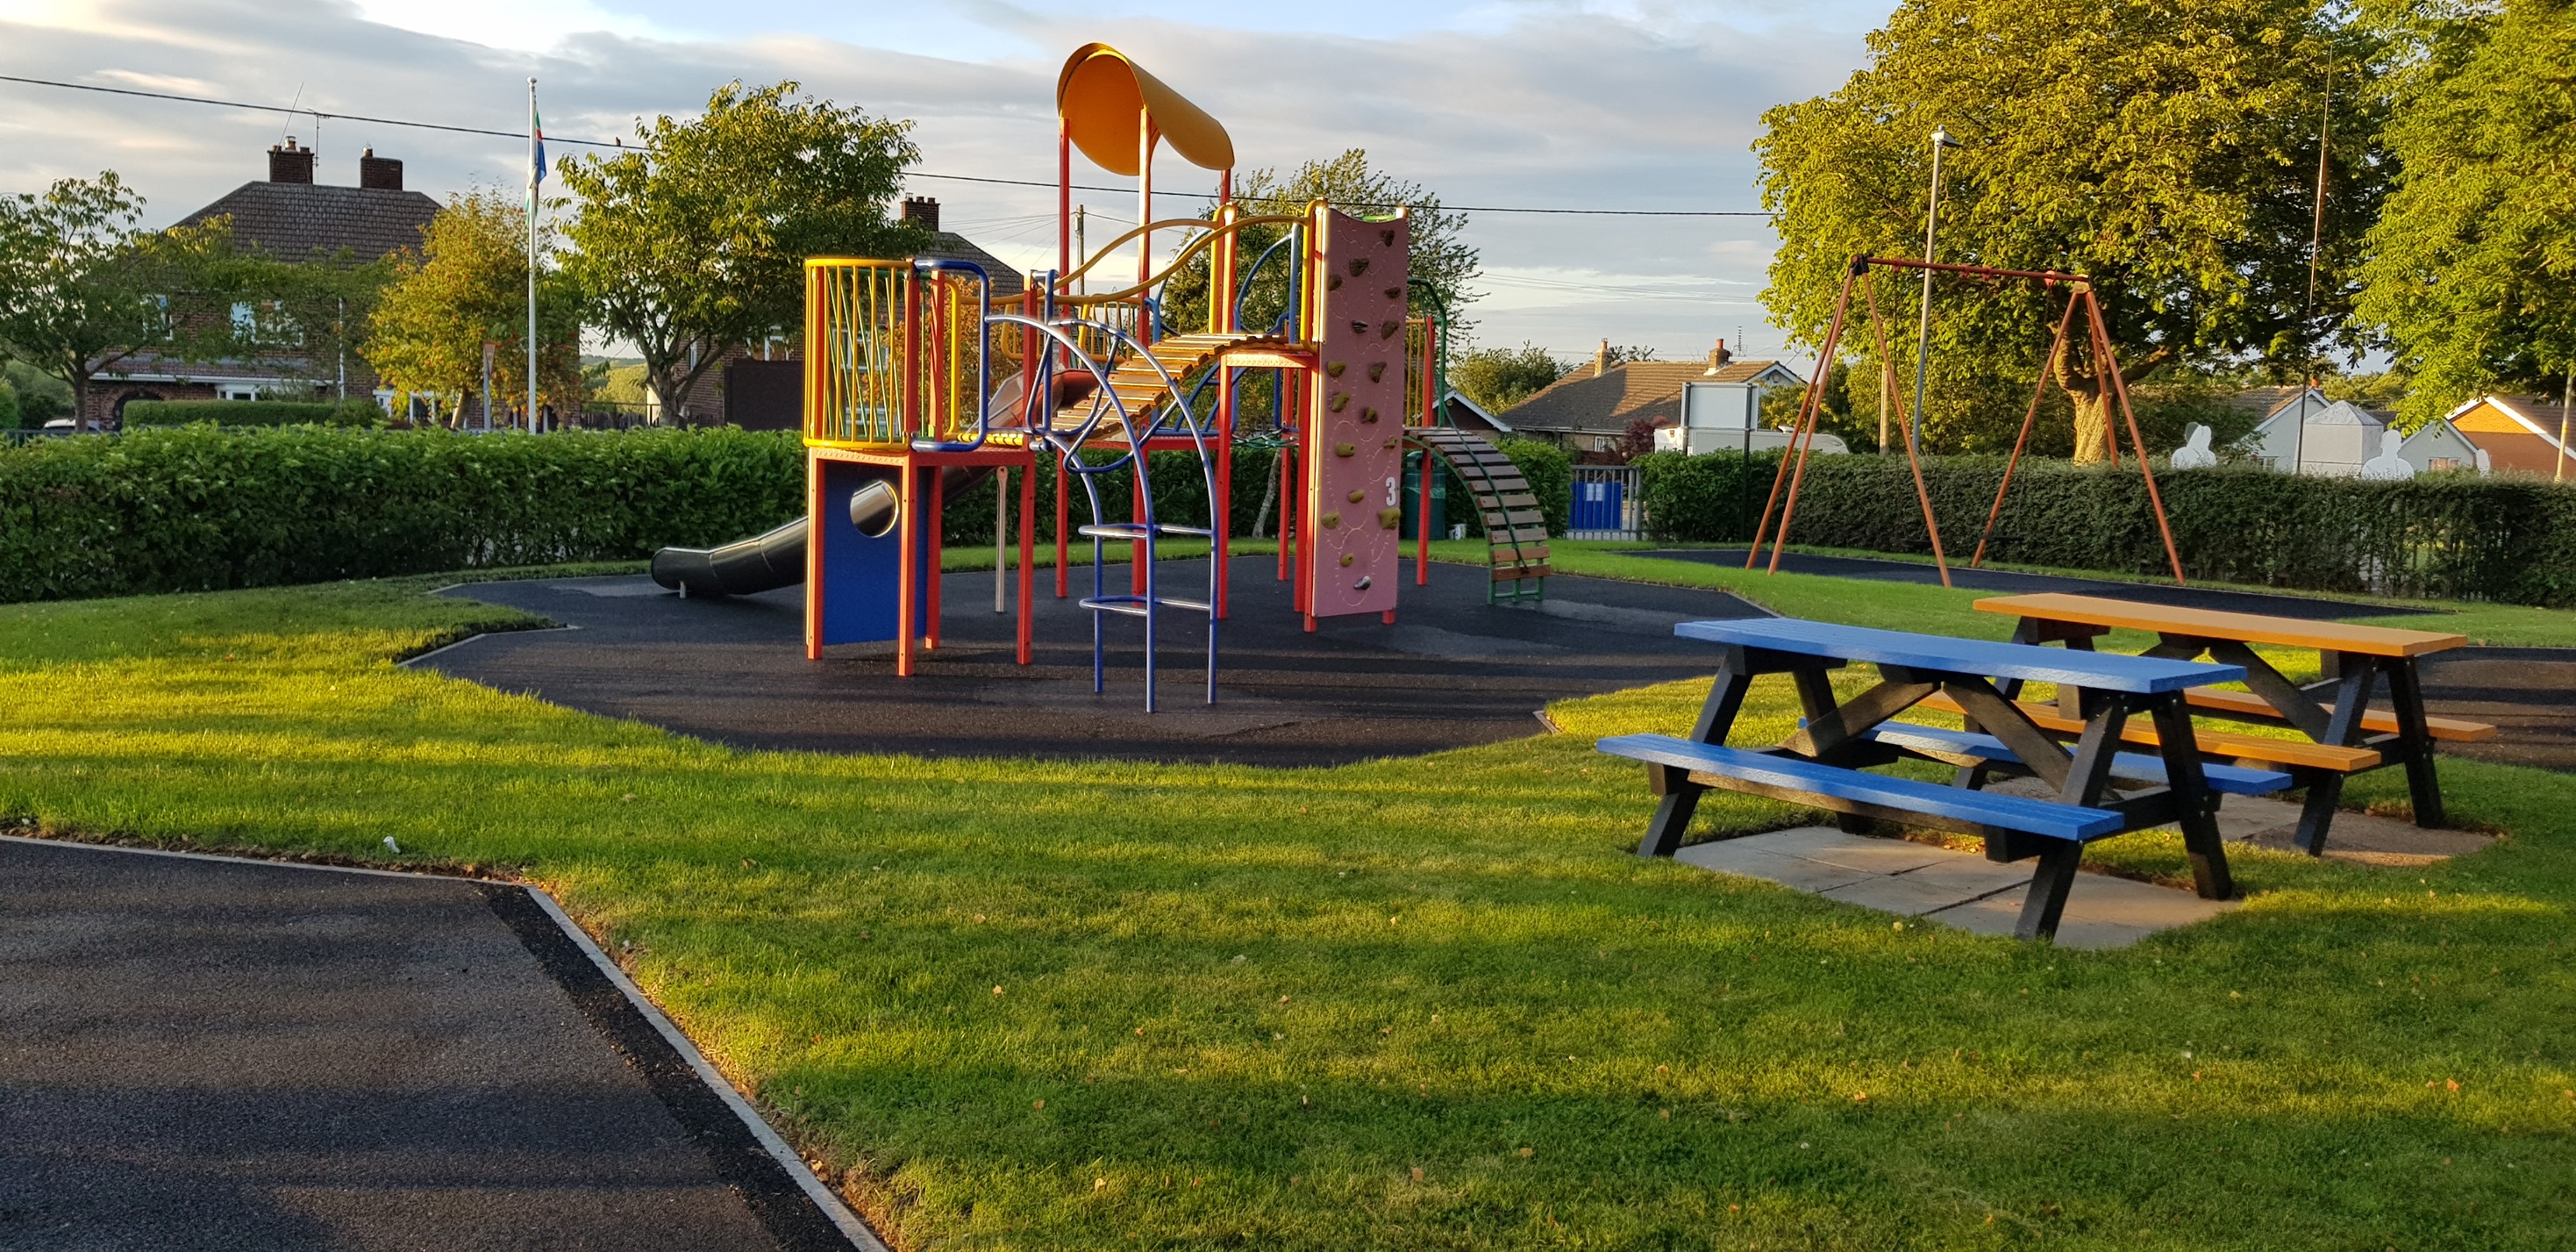 This is a n image of the village playground